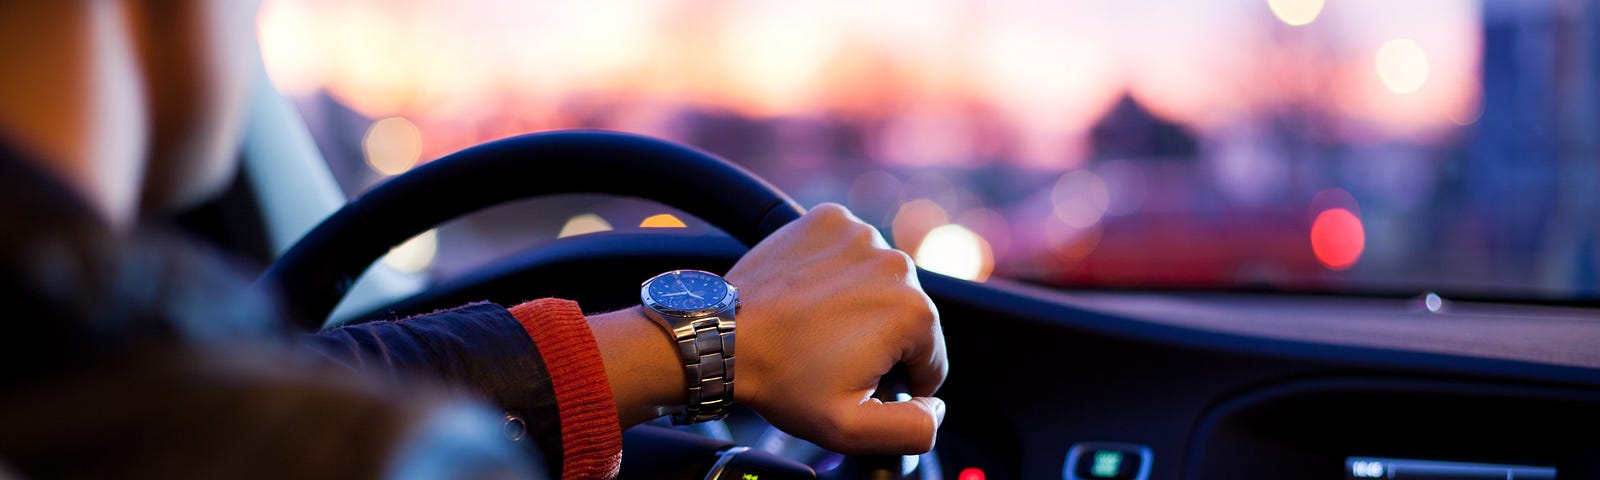 man driving. Photo shows him sitting in car with hand on steering wheel.